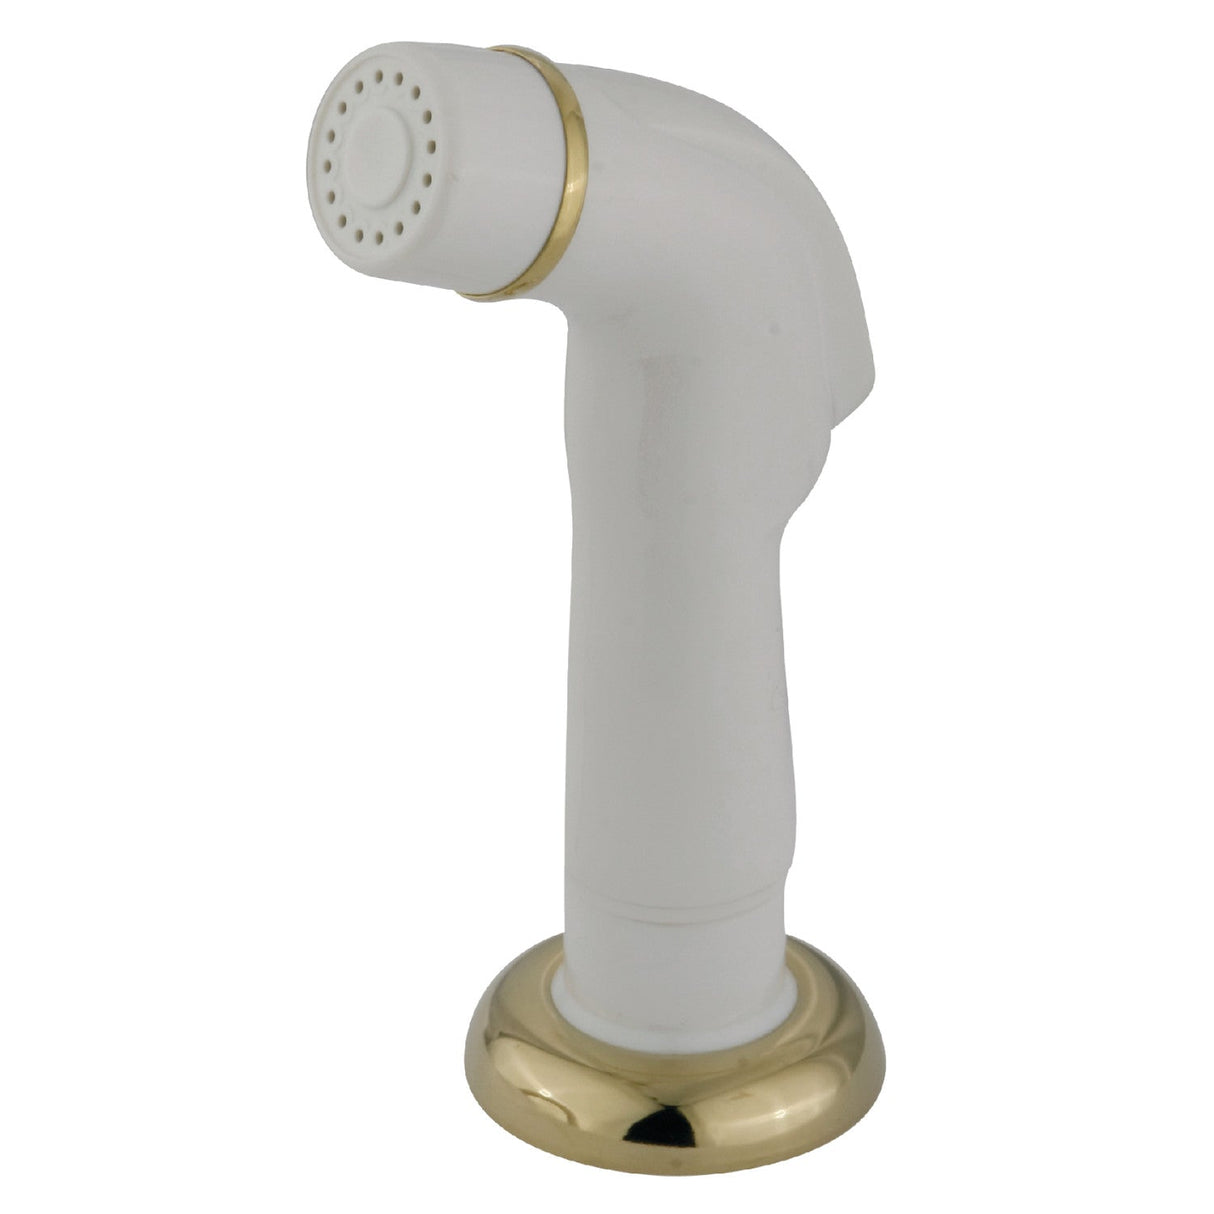 Made To Match KBS752SP Plastic Kitchen Faucet Side Sprayer, White/Polished Brass